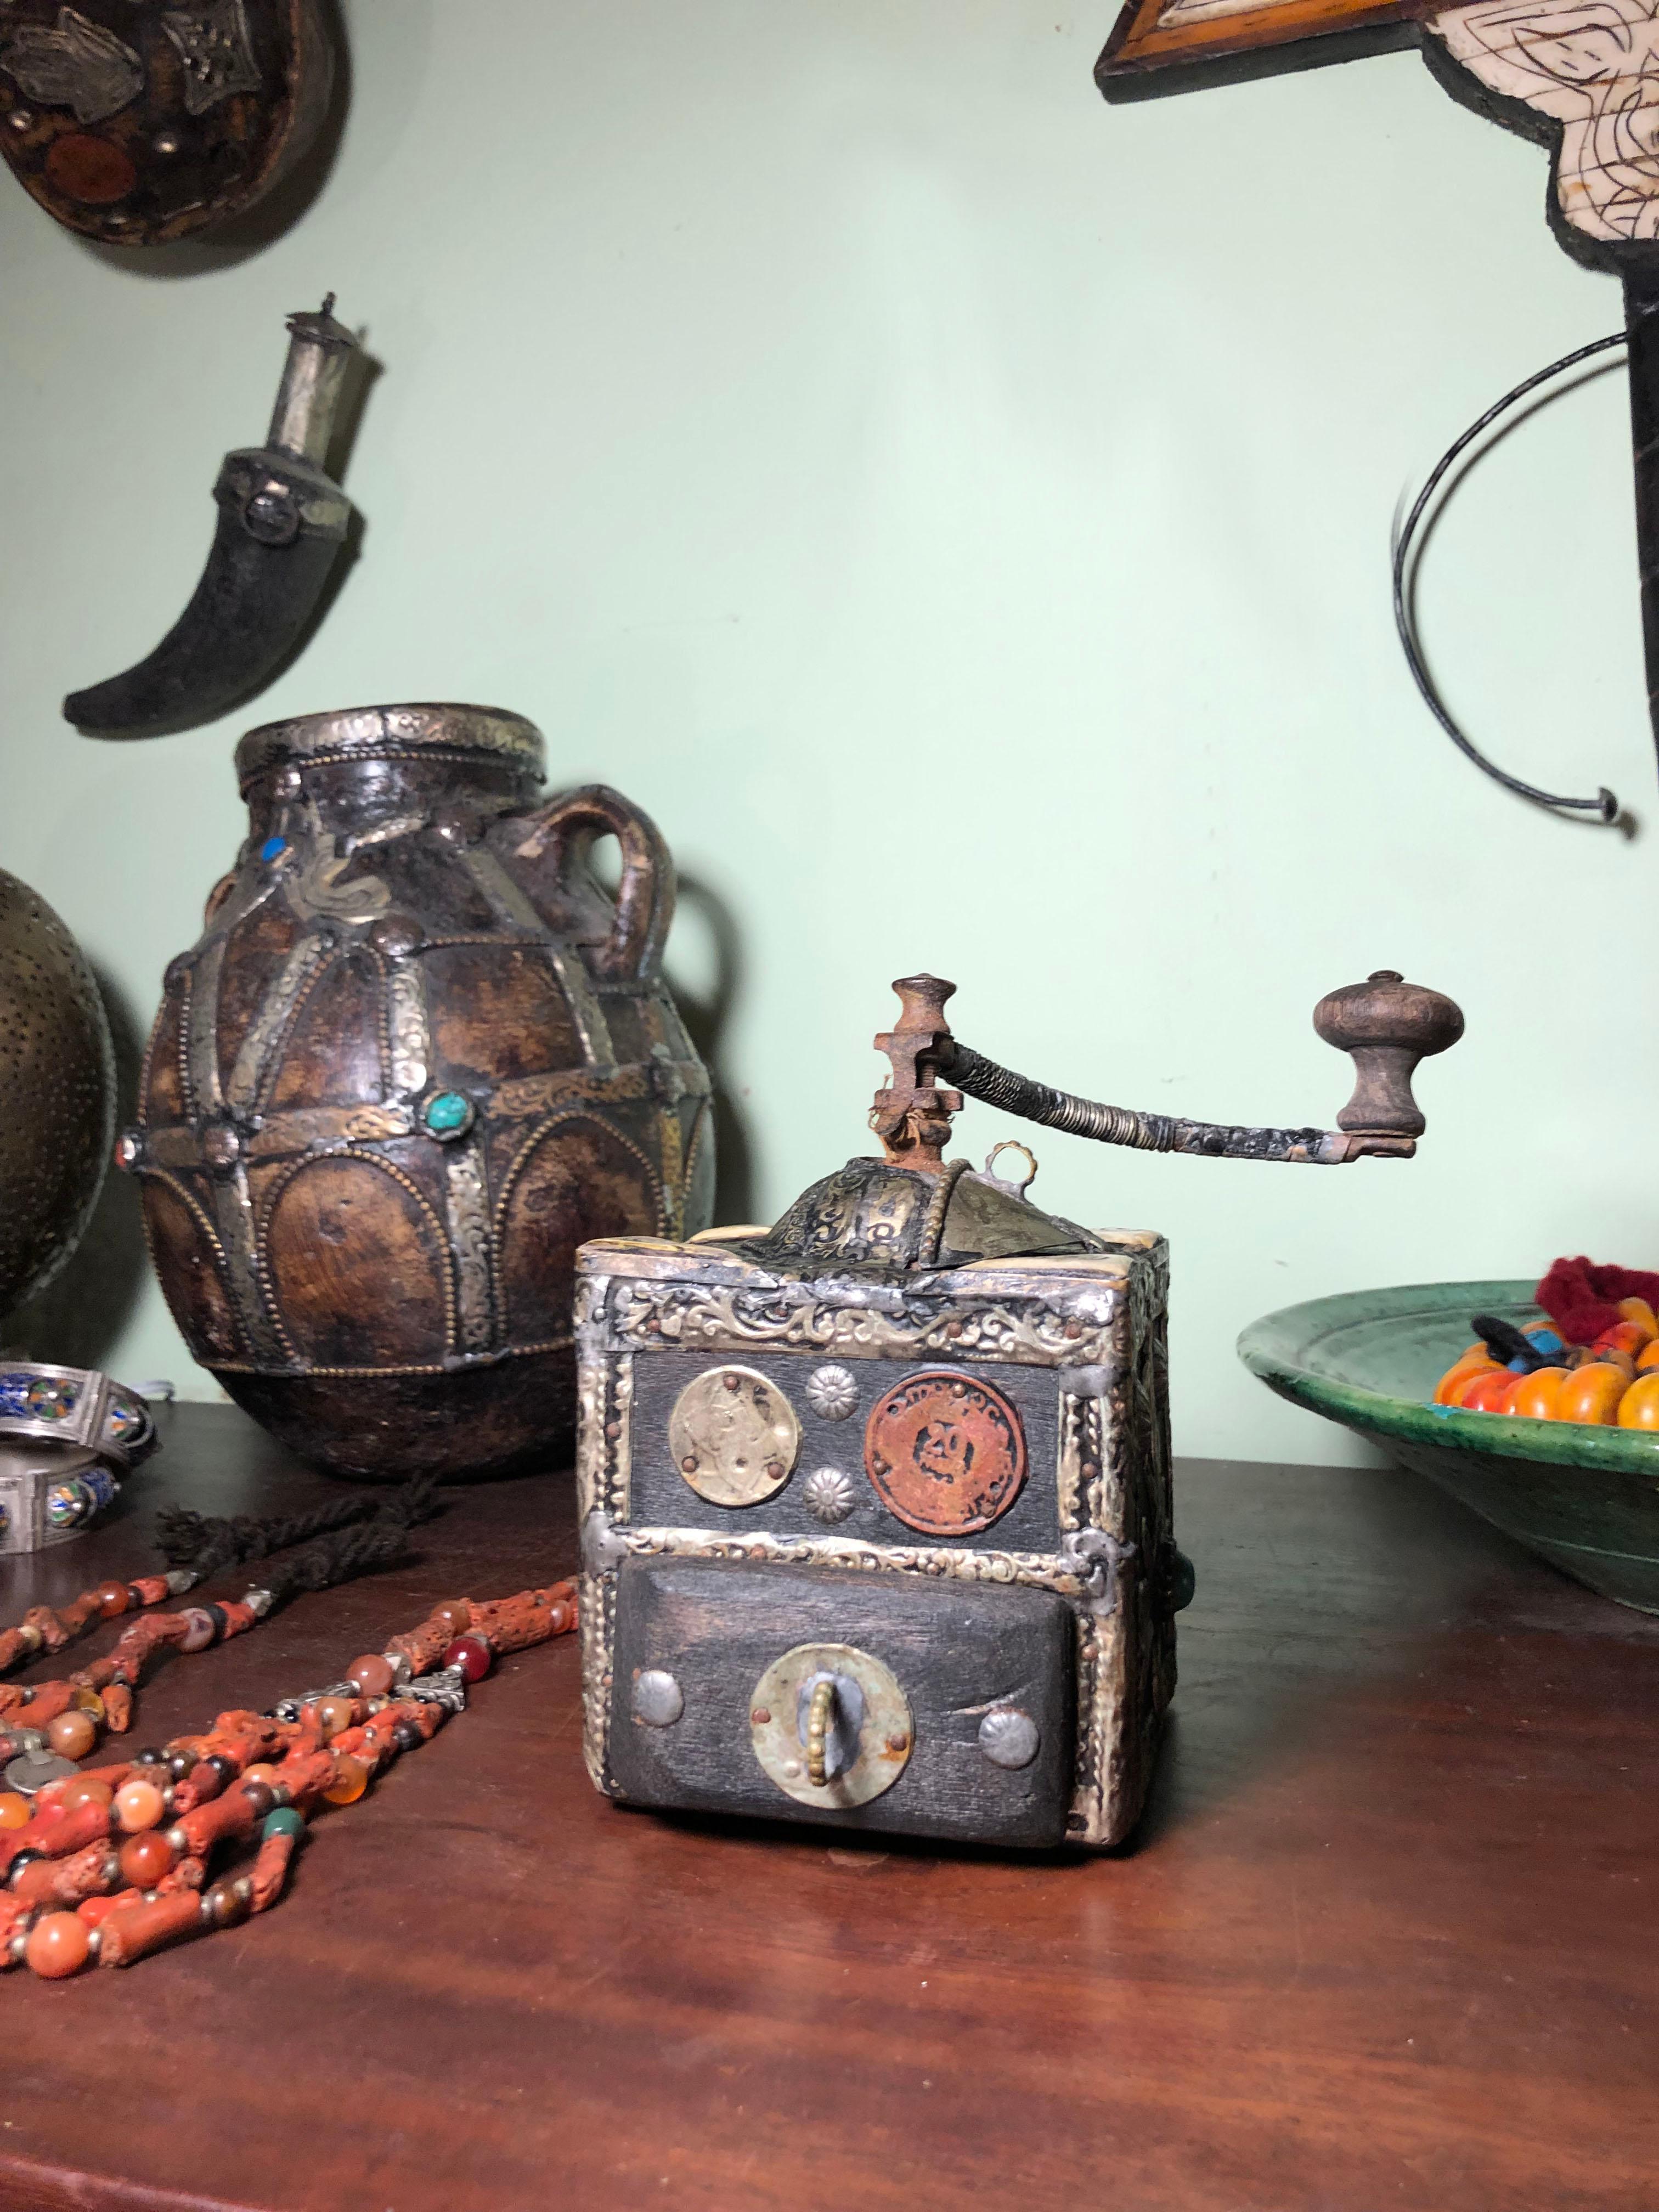 This antique coffee grinder is made of ebony wood, with hand-engraved silver melange adornment, hand-carved camel bone embellishments, and two coins. Entirely handmade, this grinder was used by southern Morocco nomads while traveling and crossing